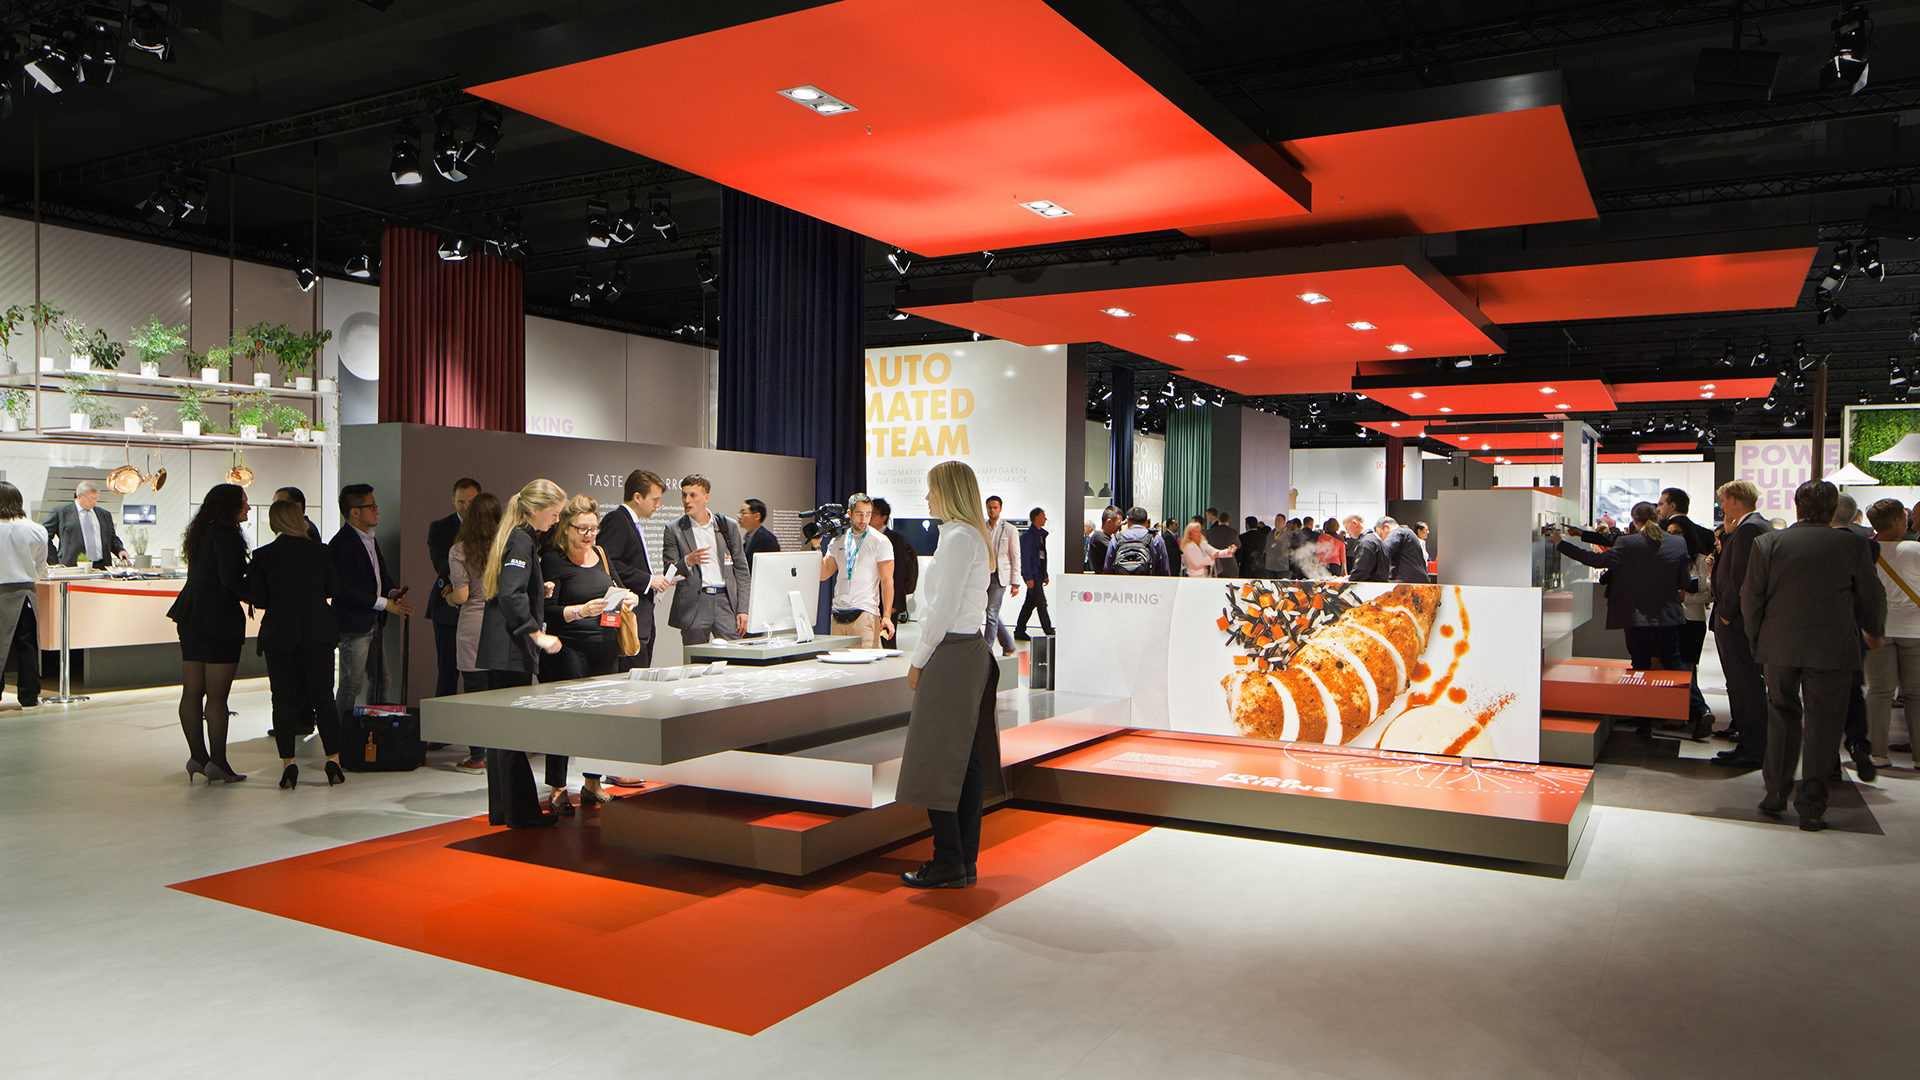 Dart stages the Electrolux fair stand at the IFA 2014